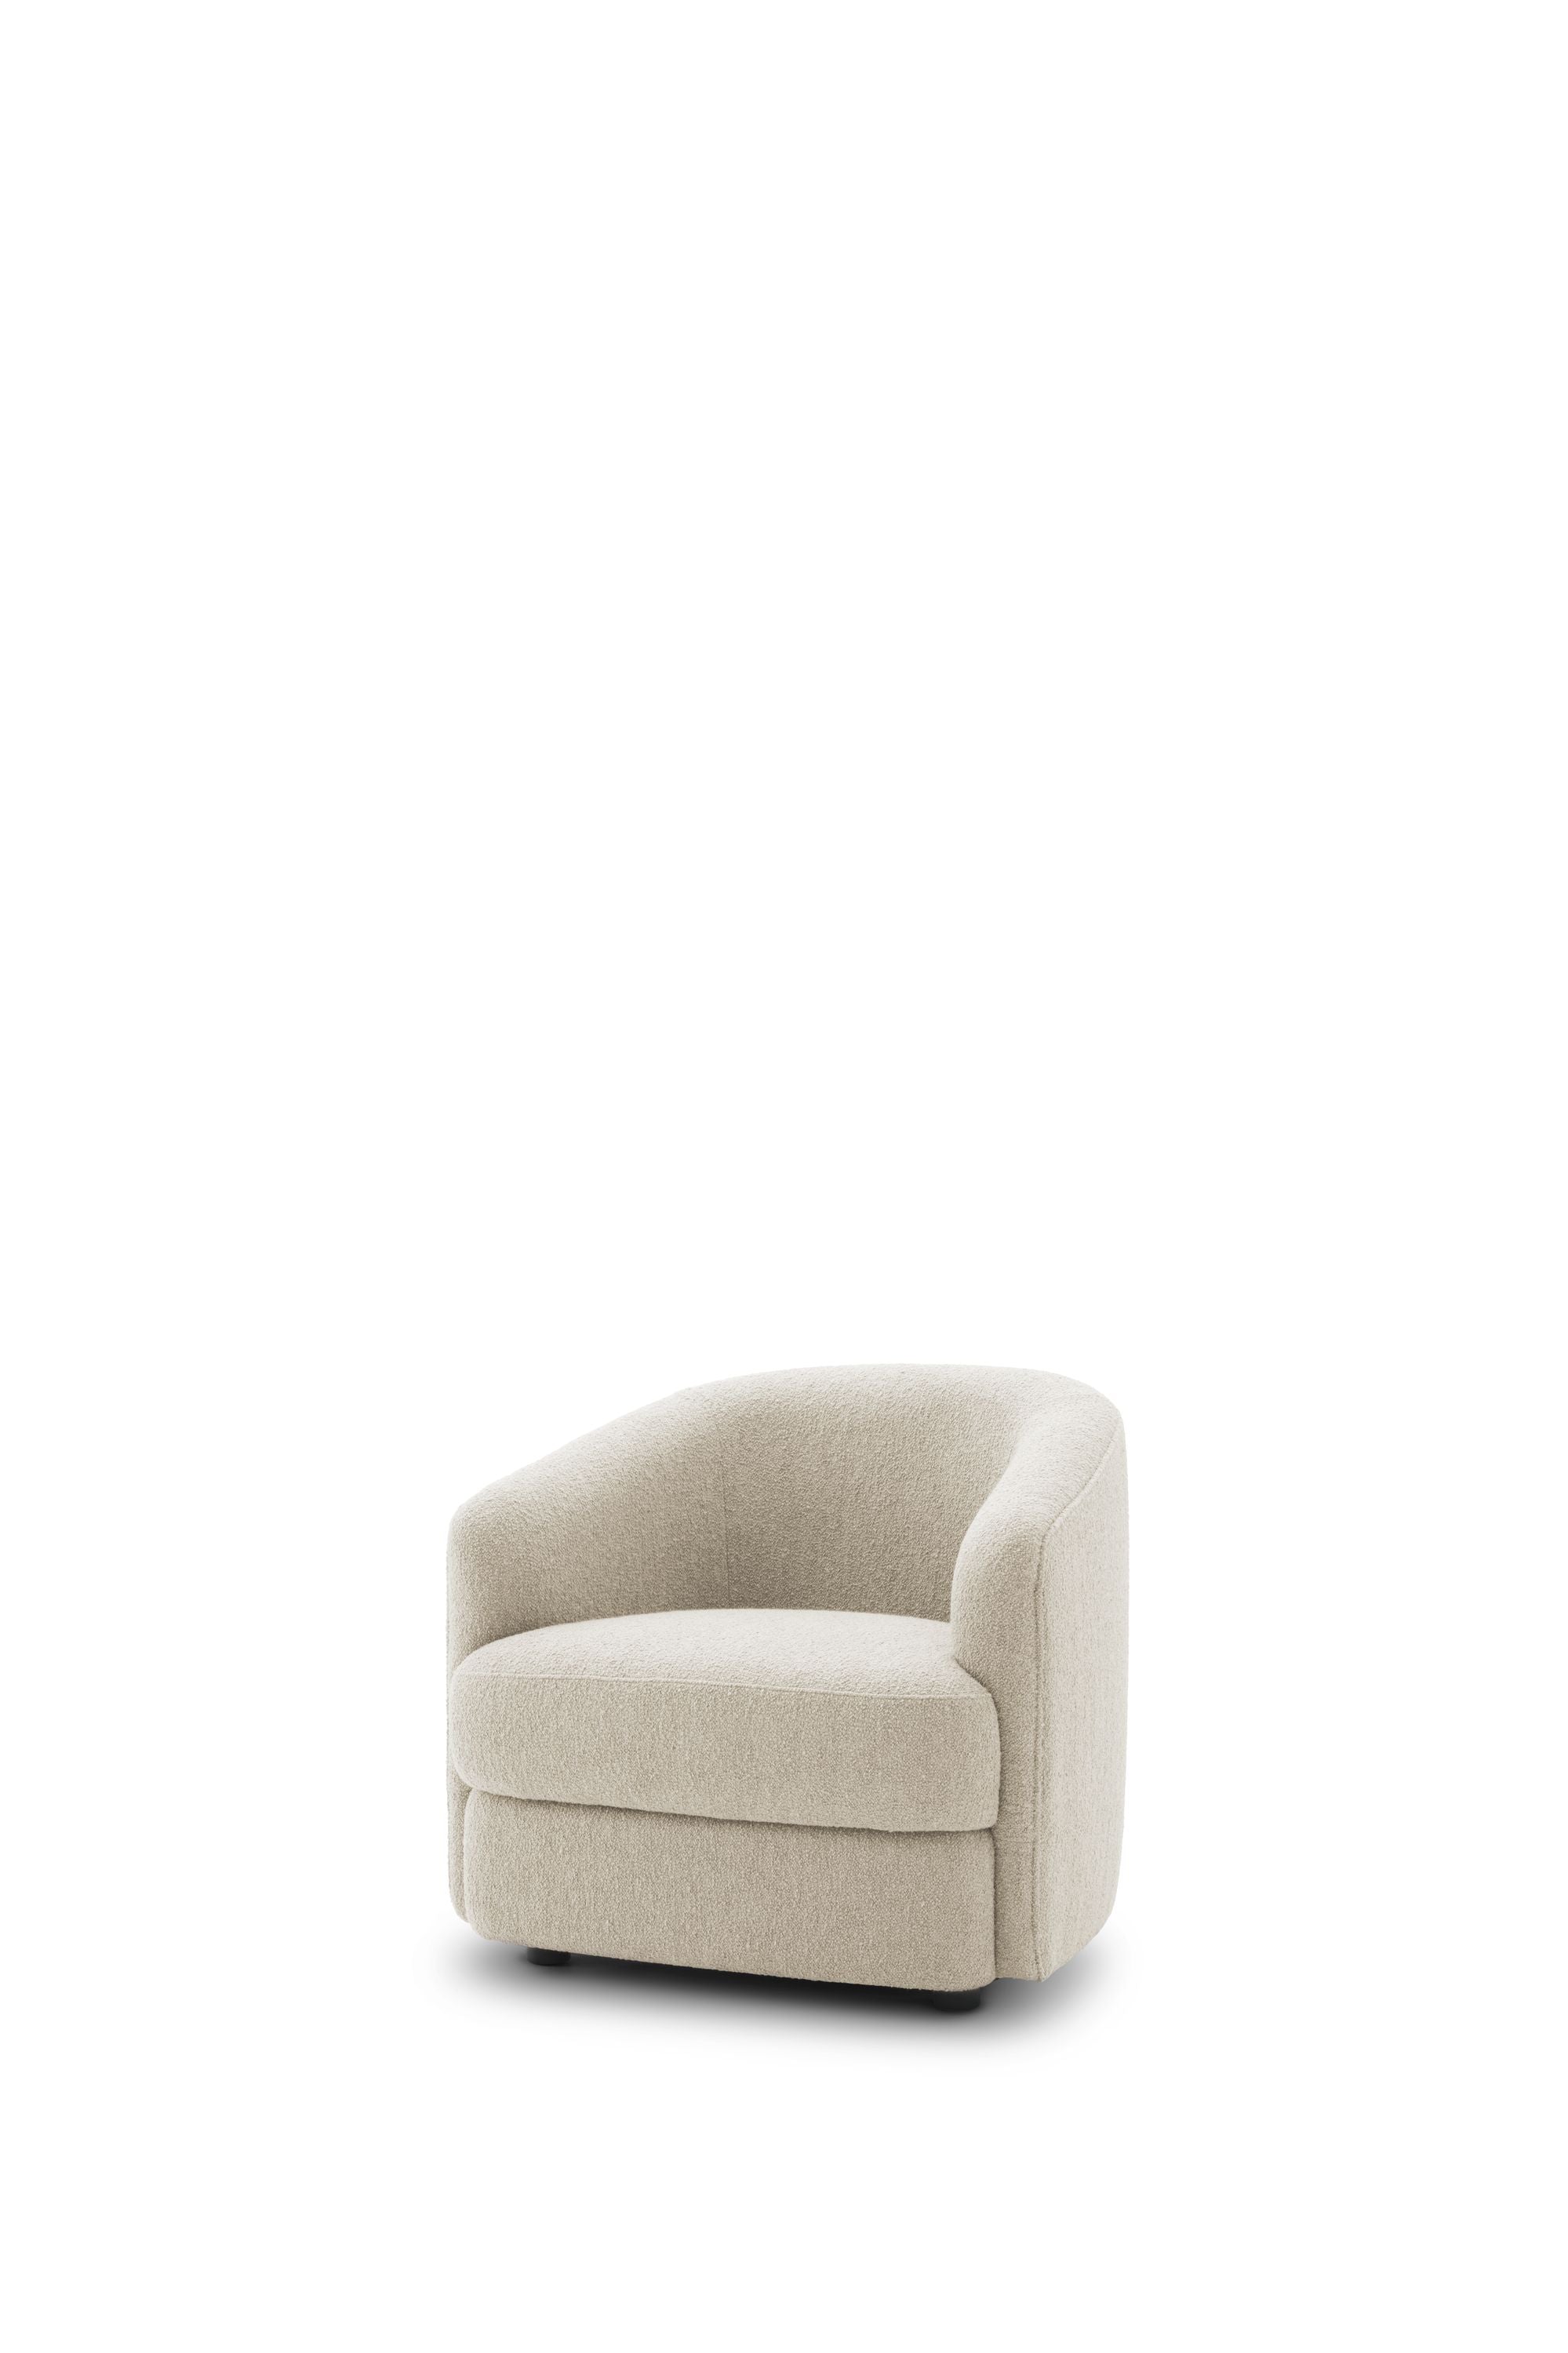 New Works Covent Lounge Chair, Lana